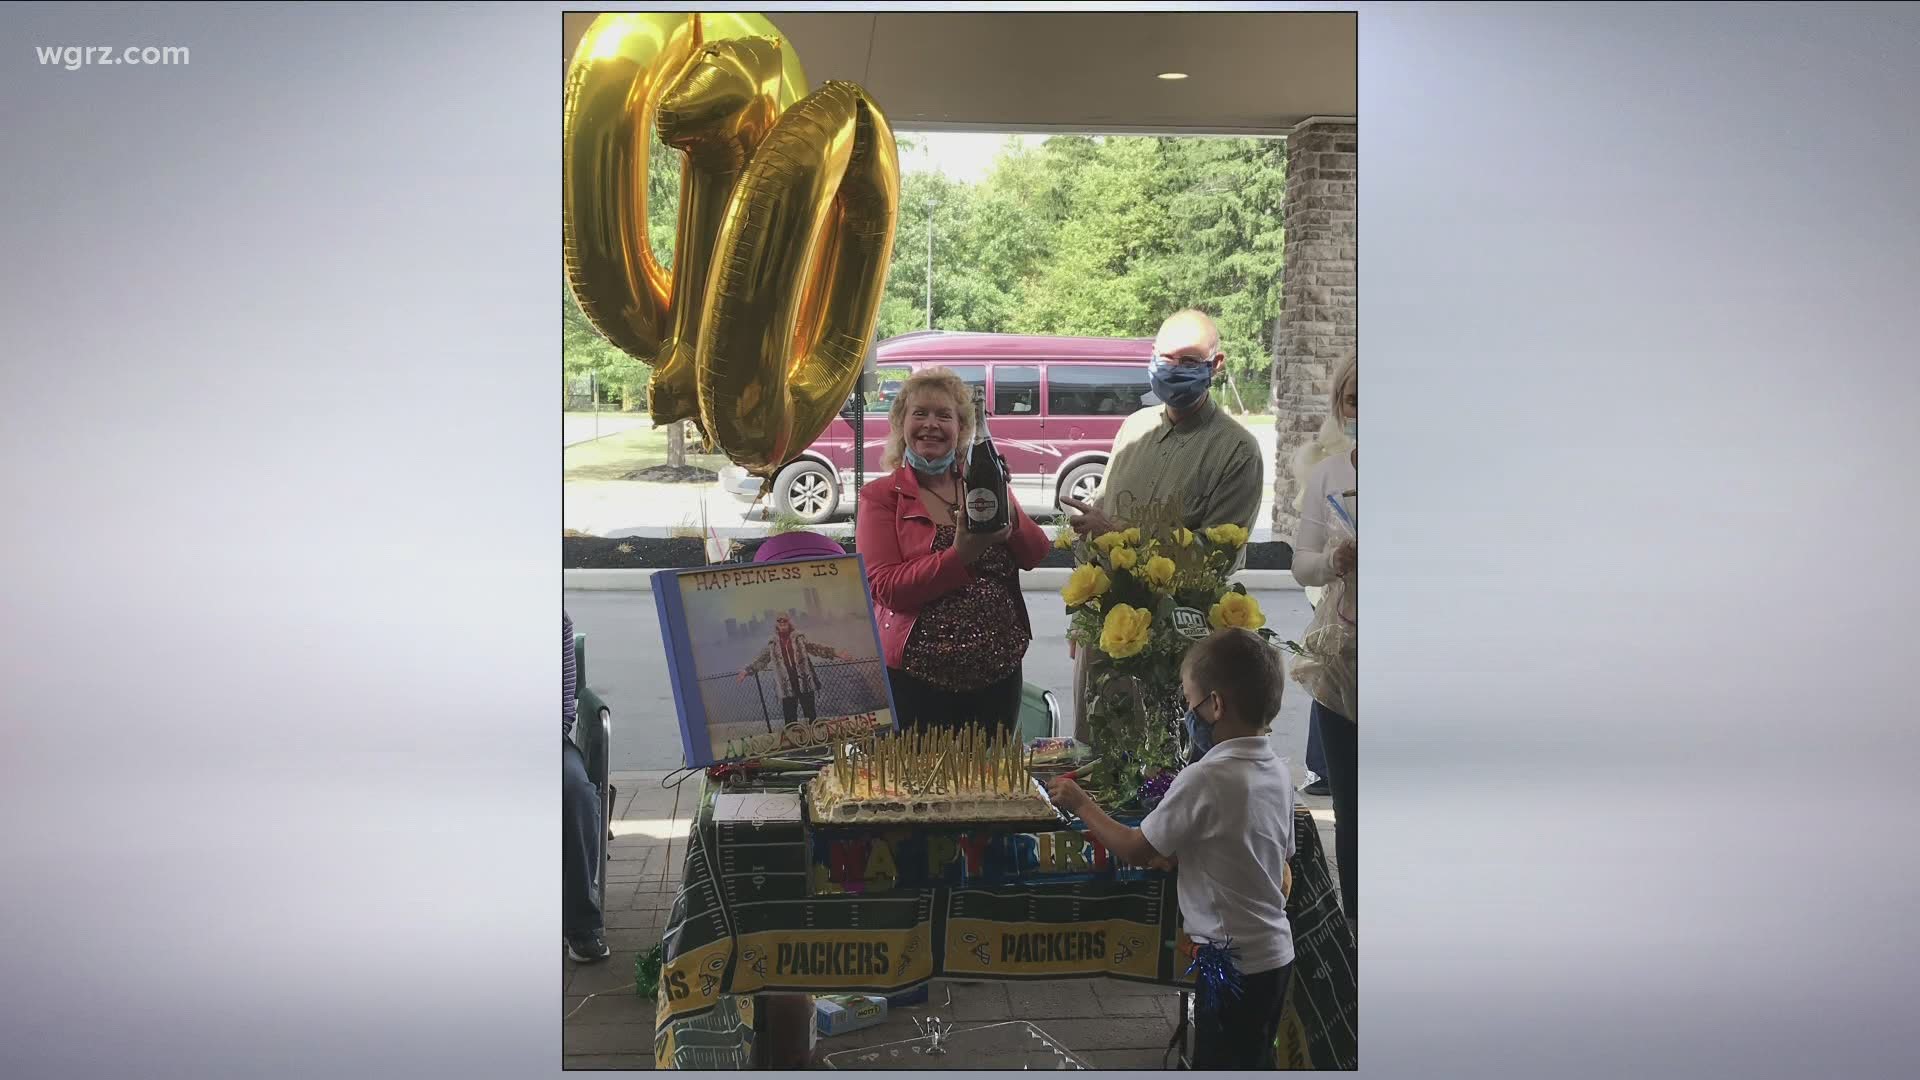 Her great-grandchildren blew out all 100 candles on her cake for her.